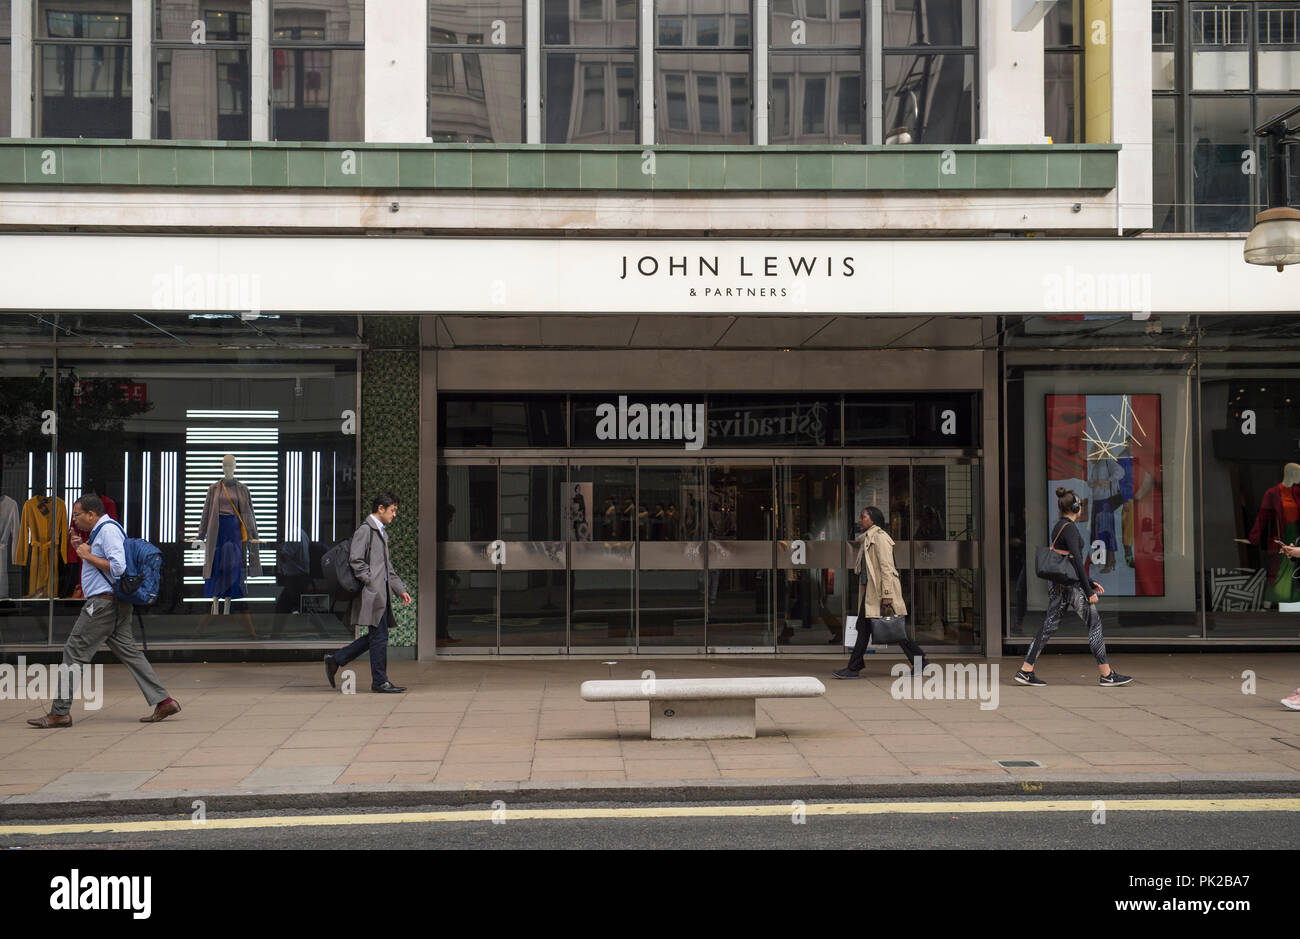 Oxford Street, London, UK. 10 September, 2018. John Lewis partnership rebrands itself John Lewis and Partners with new fascia signs appearing on the flagship Oxford Street store in central London on a quiet September weekday morning. The revised brand identity was designed by Pentagram. Credit: Malcolm Park/Alamy Live News. Stock Photo